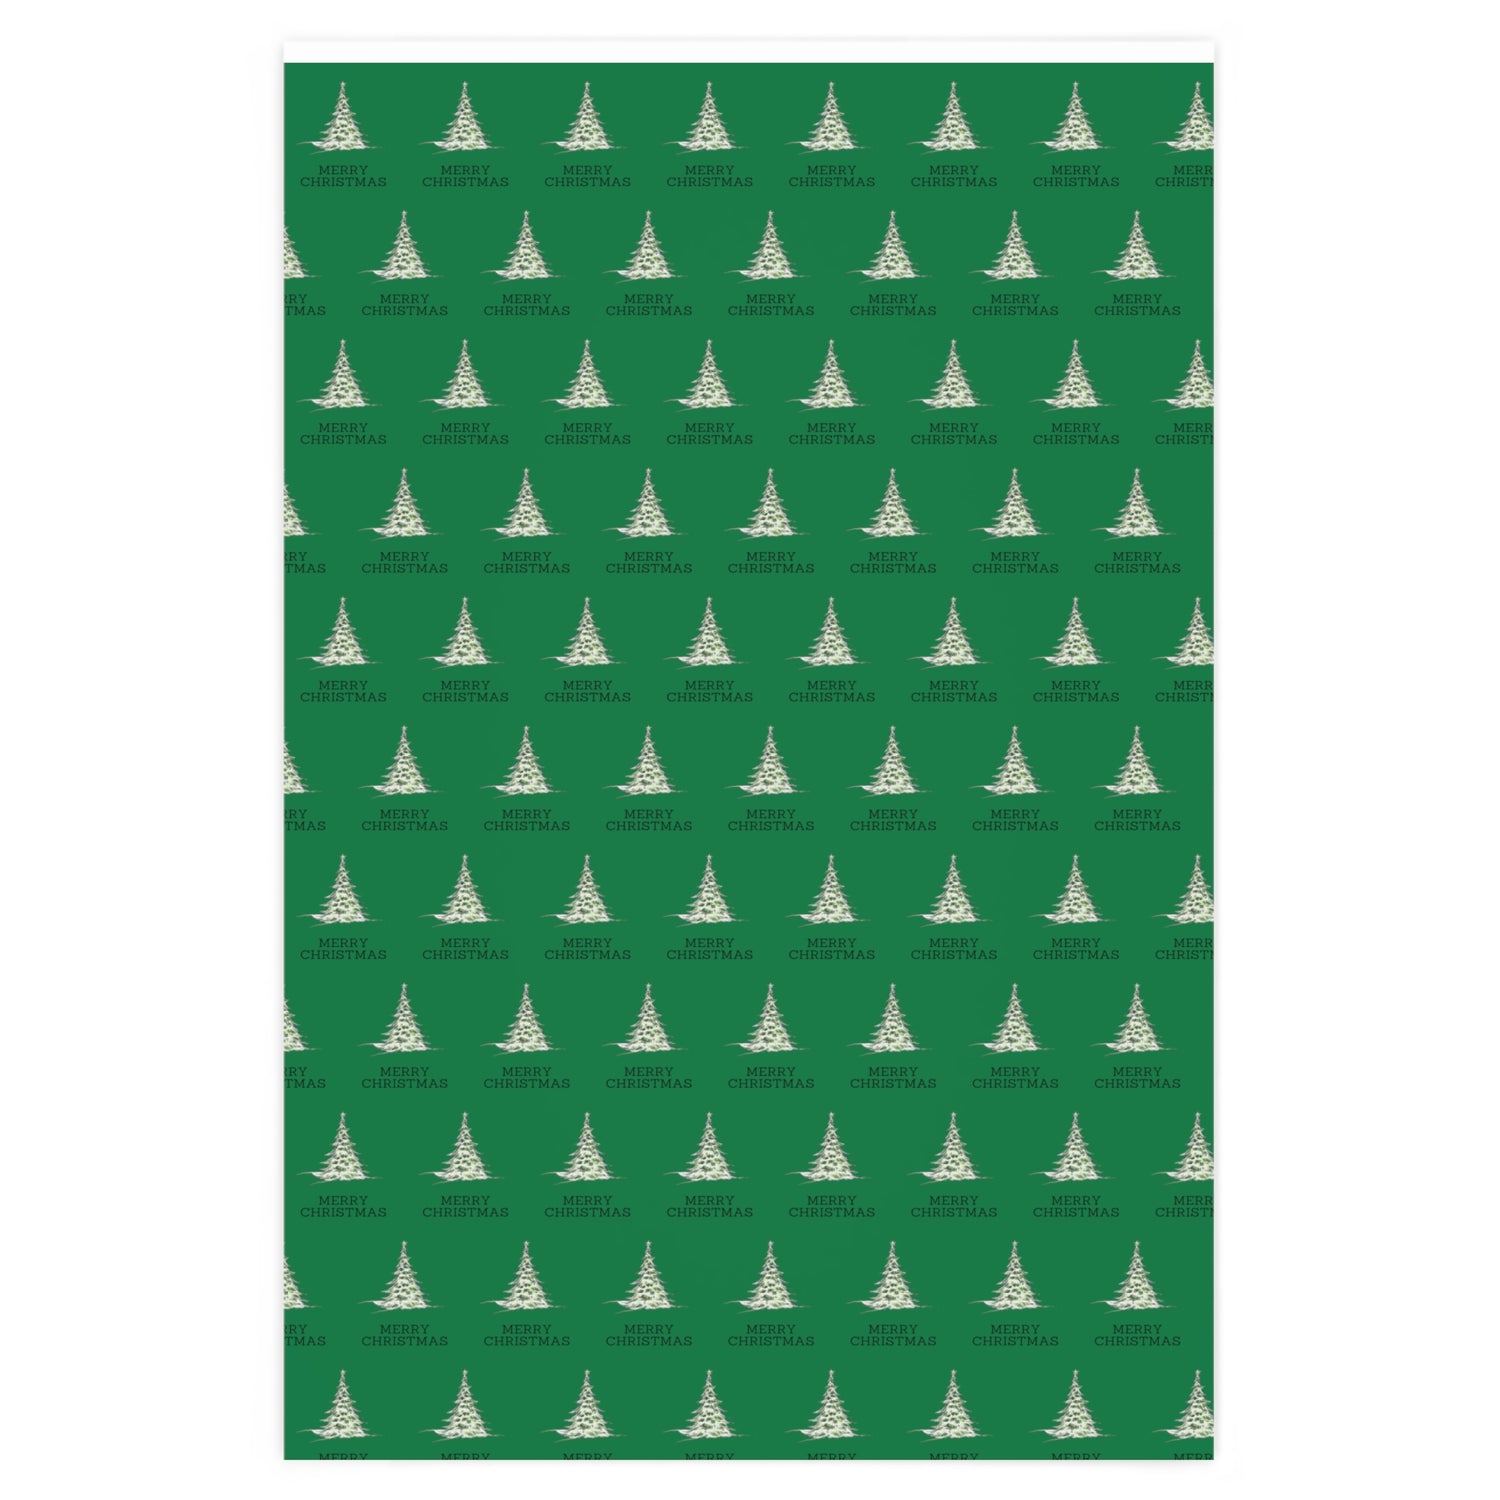 Evergreen Merry Christmas Wrapping Paper